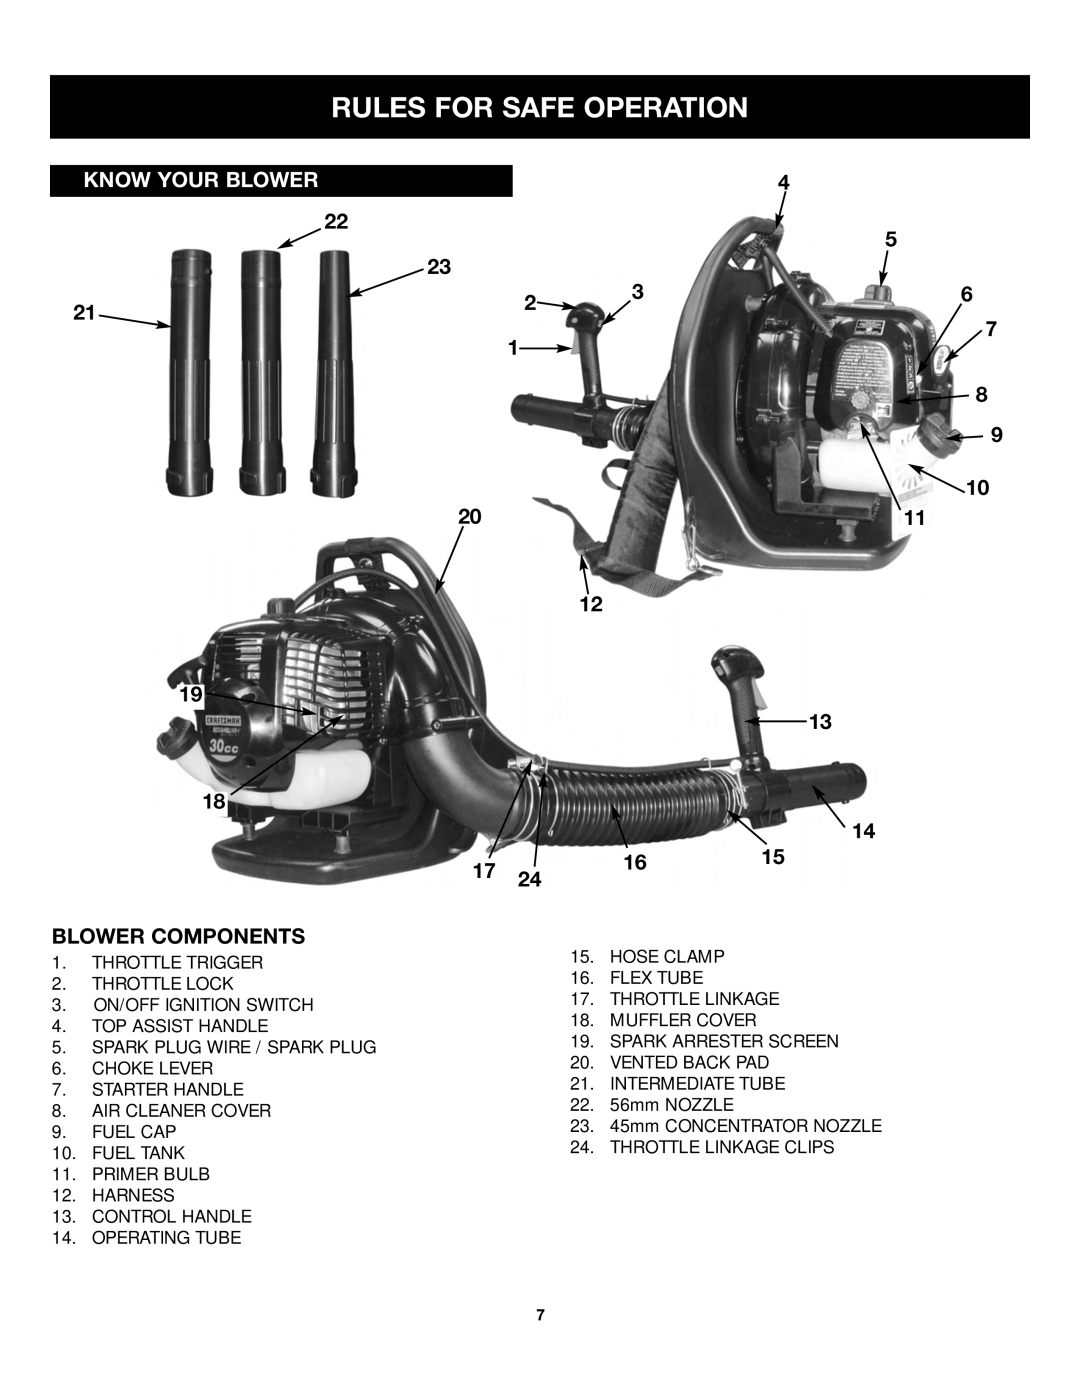 Craftsman 316.79499 manual Know Your Blower, Blower Components, Rules For Safe Operation 